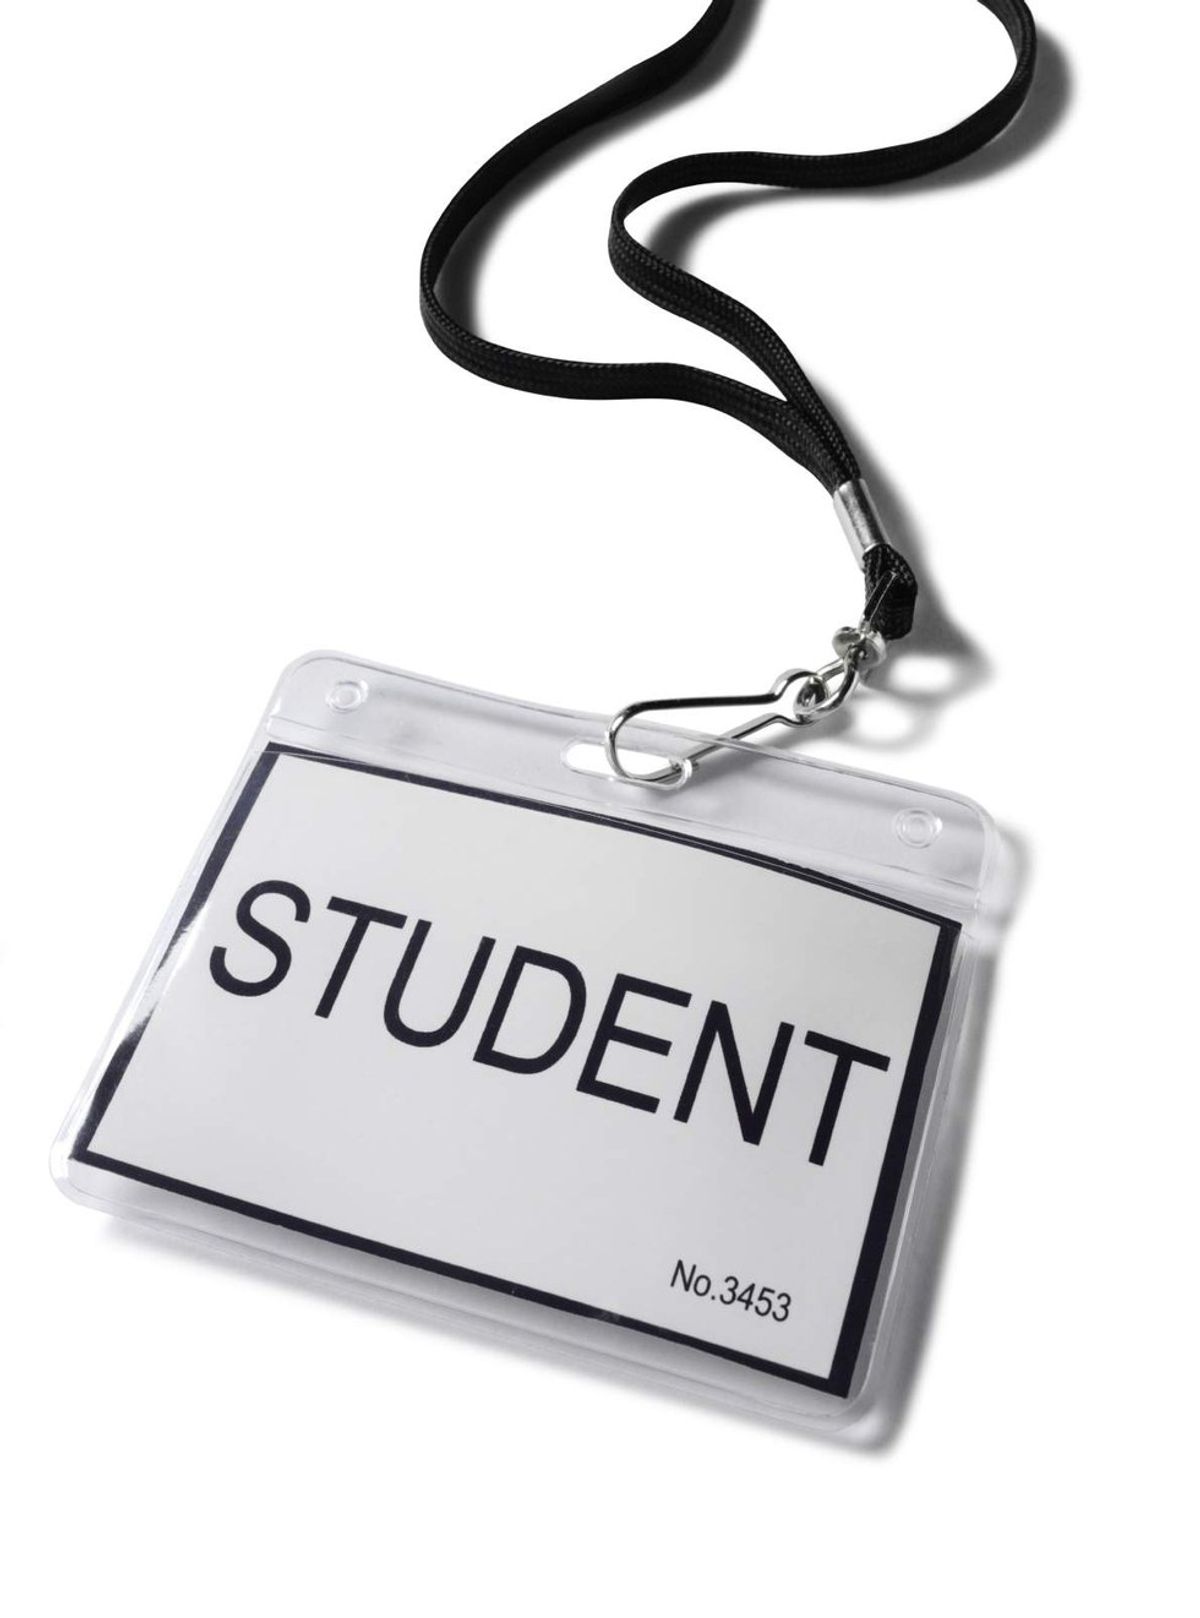 21 Discounts You Can Get With Your Student ID